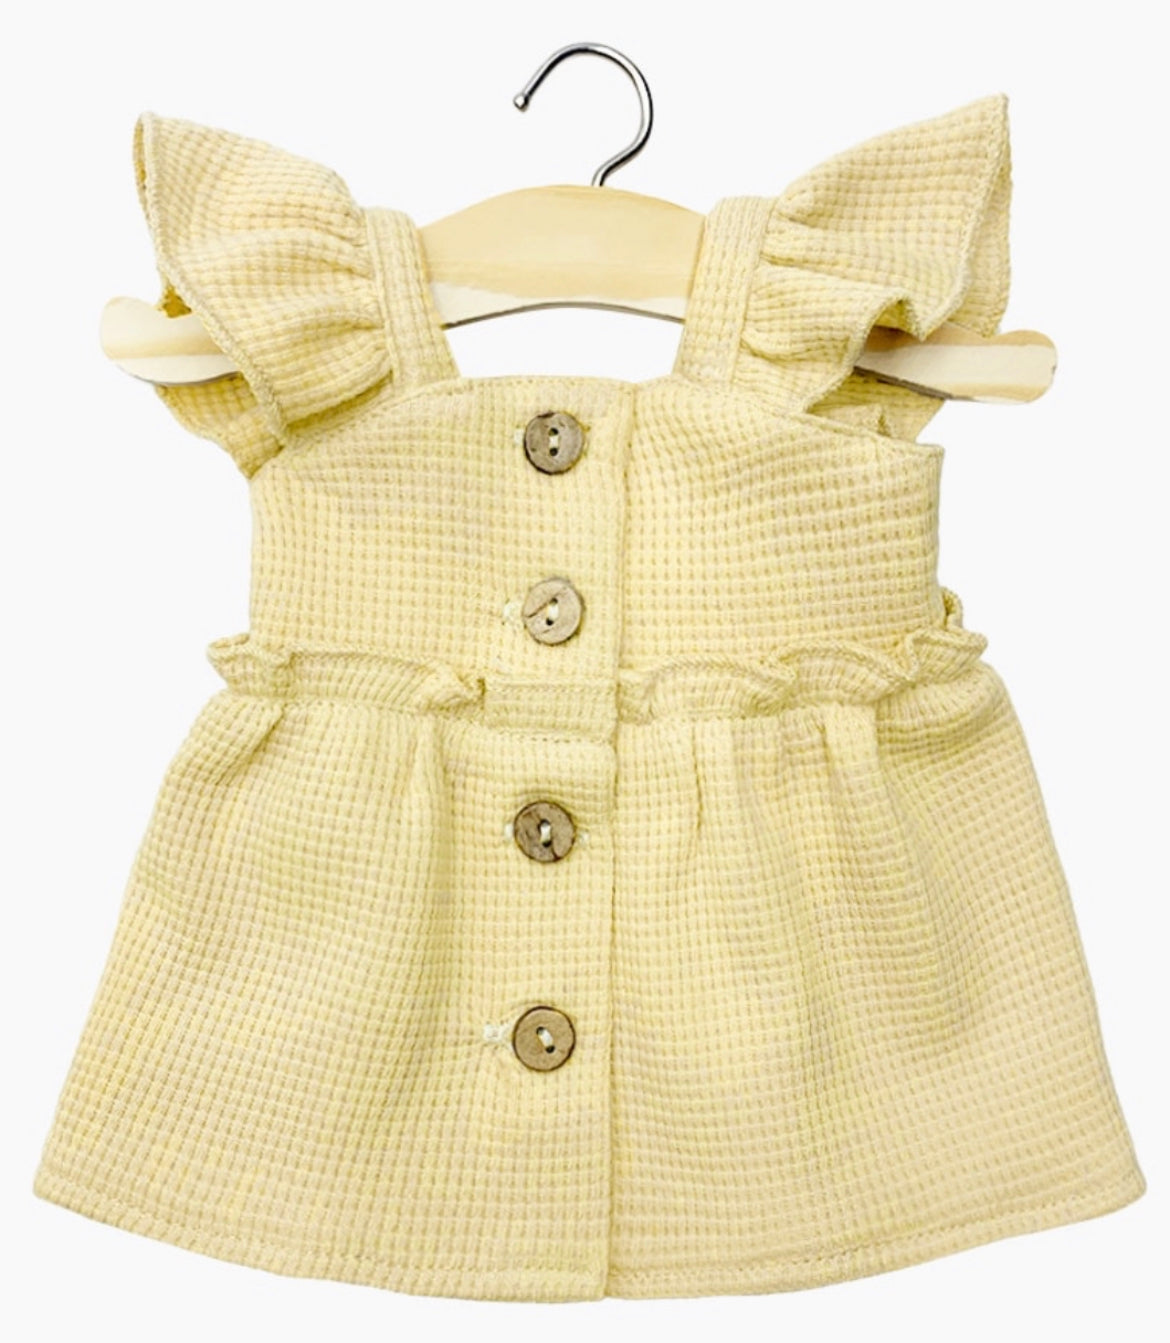 Banana Dress with Buttons - Doll